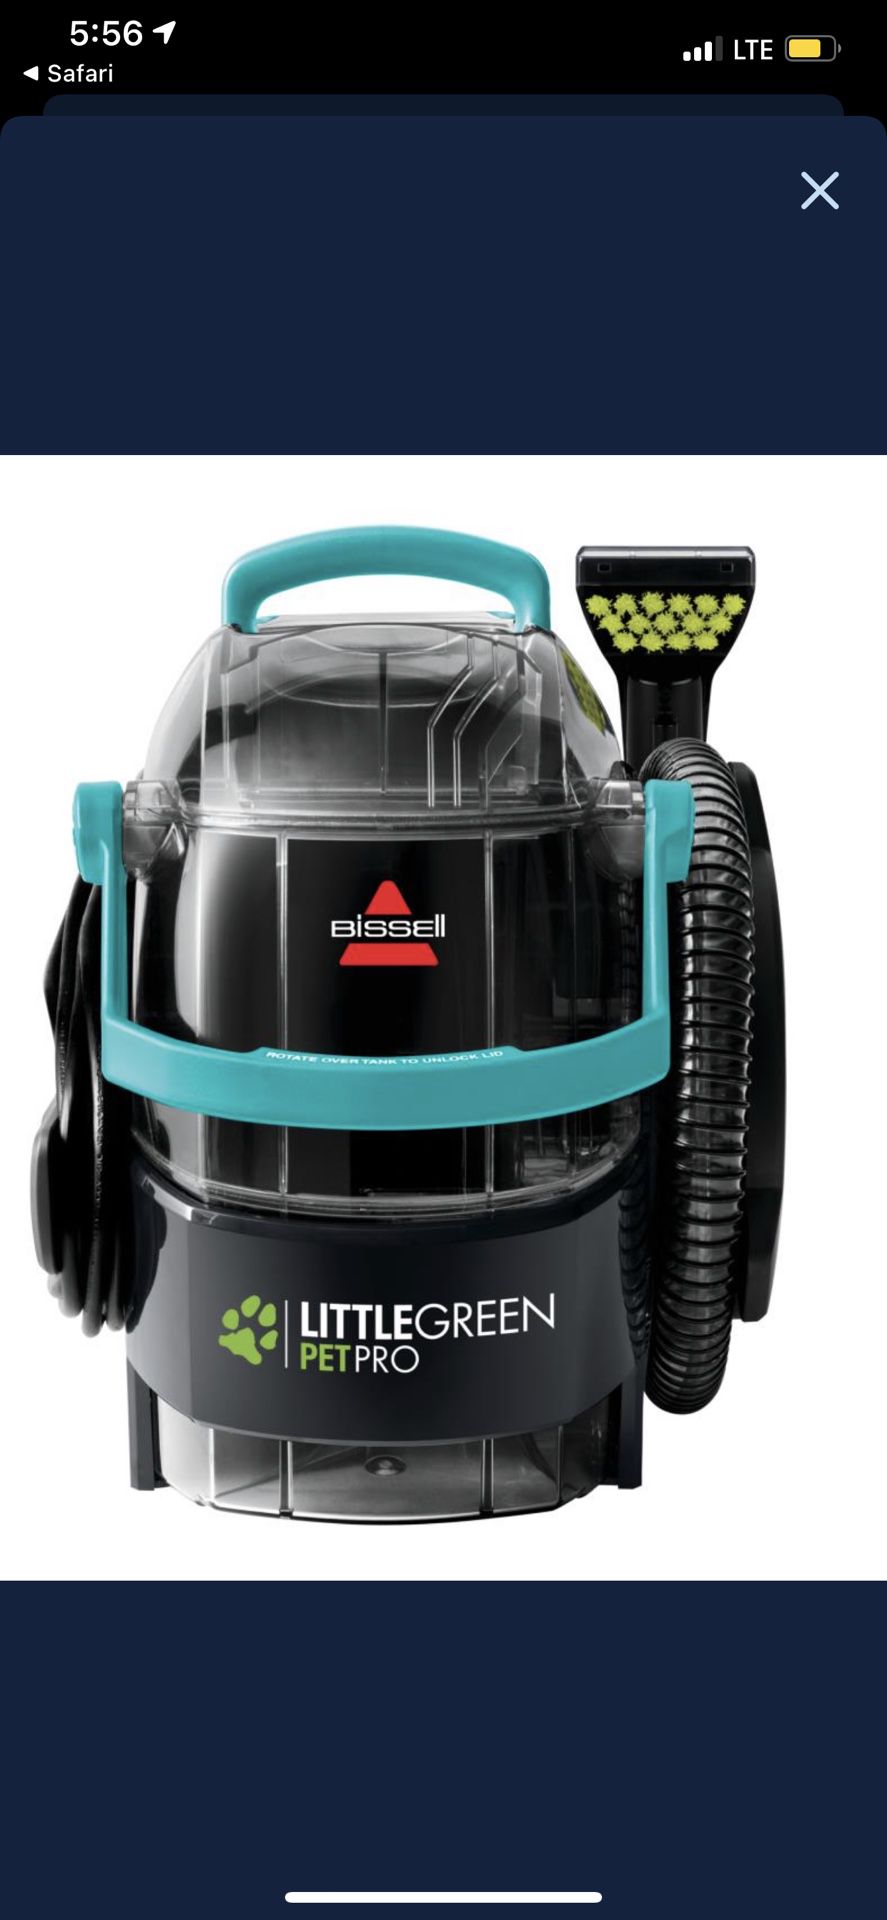 BISSELL LITTLE GREEN PROHEAT PET CARPET CLEANER